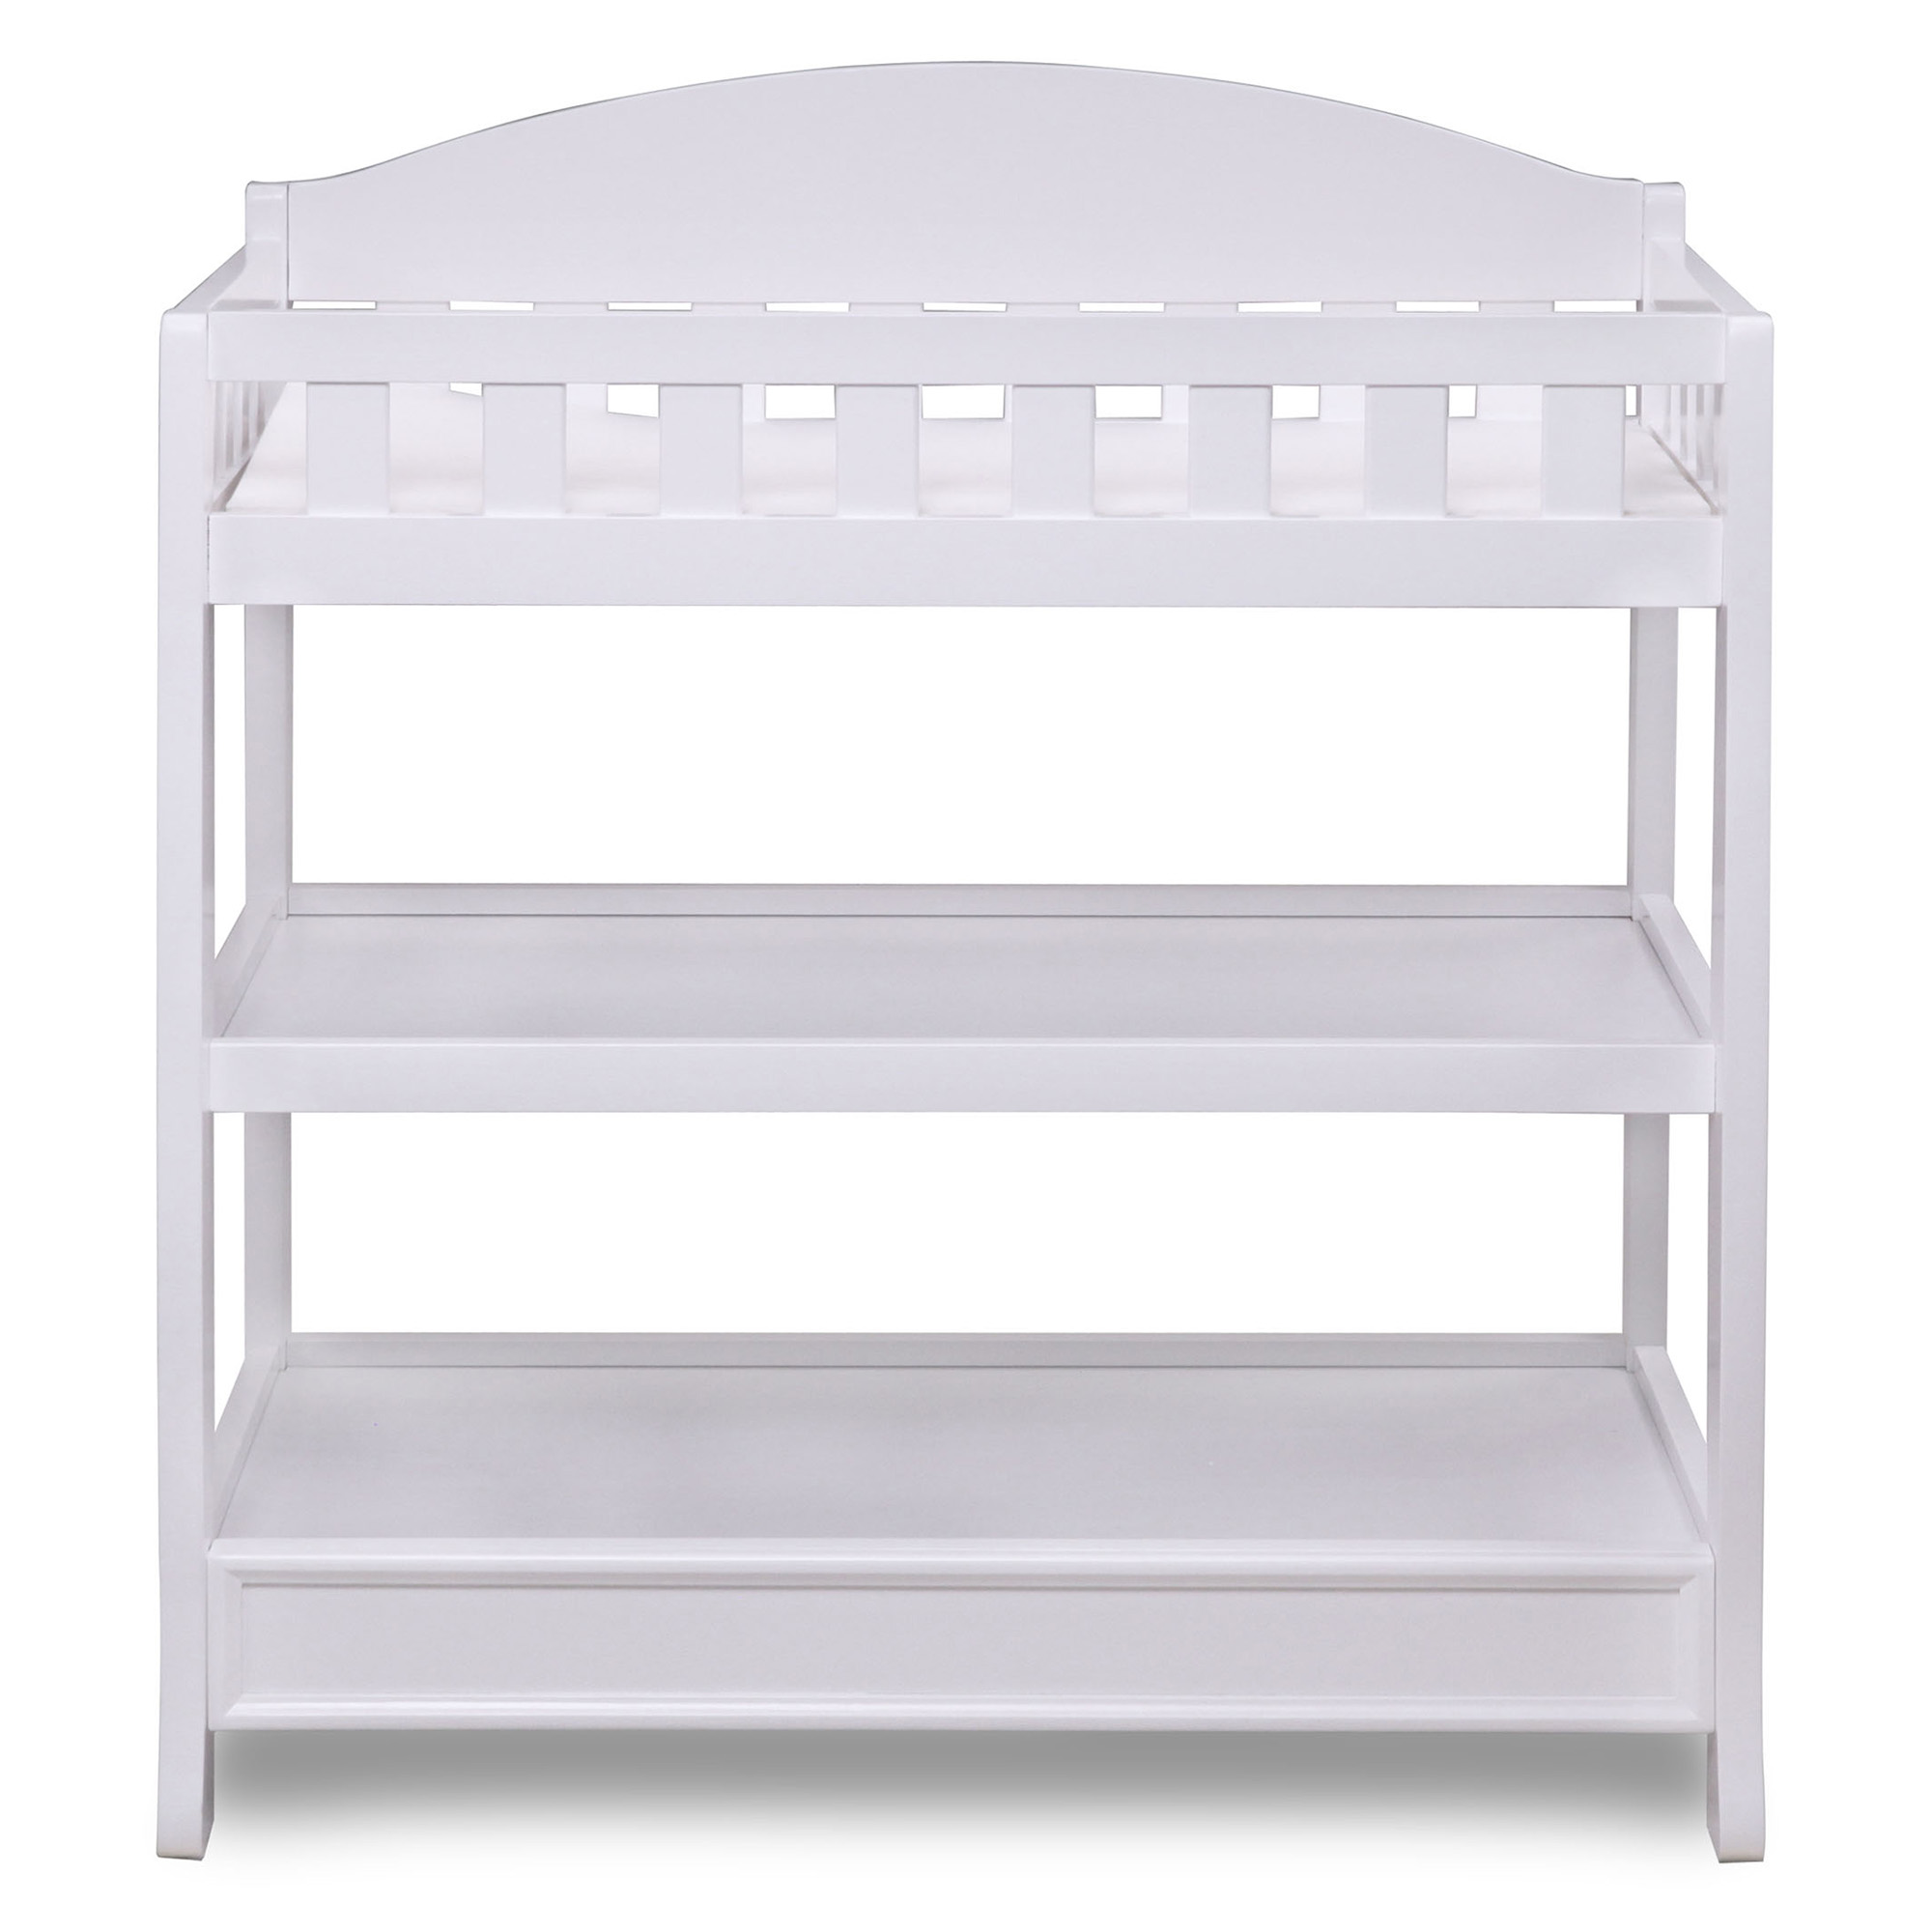 Delta Children Wilmington Wood Changing Table with Pad, White - image 5 of 6